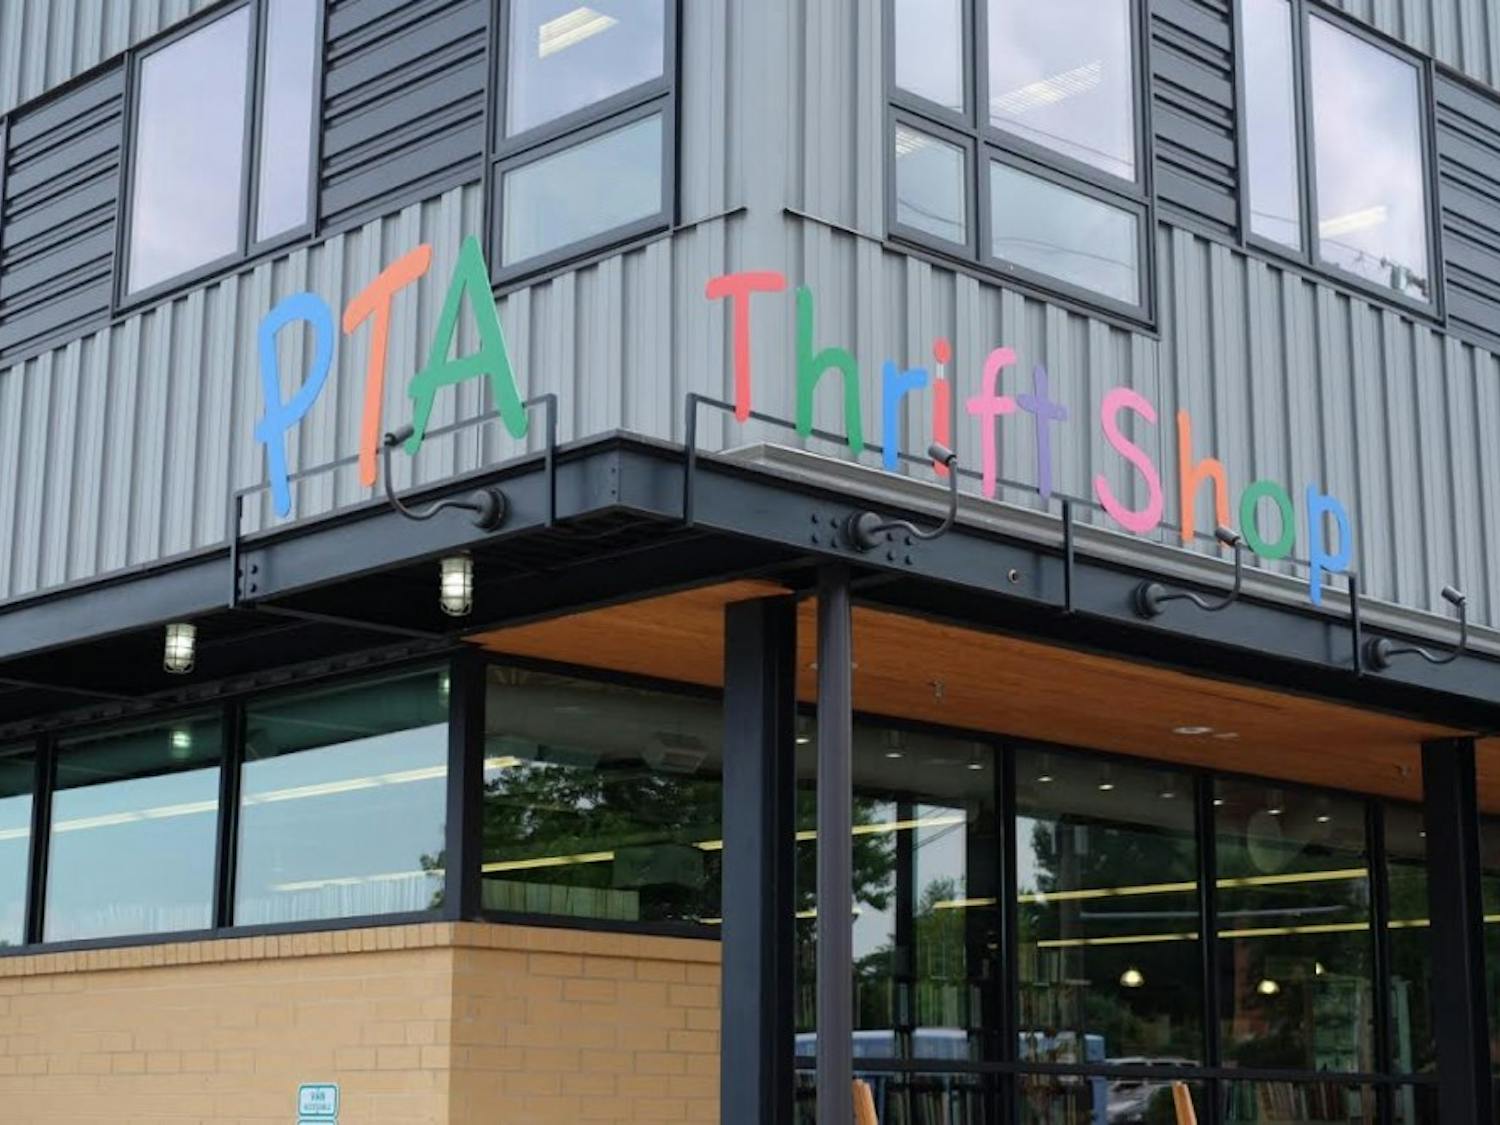 The PTA Thrift Shop located in Carrboro has donated nearly $70 million to schools since opening.